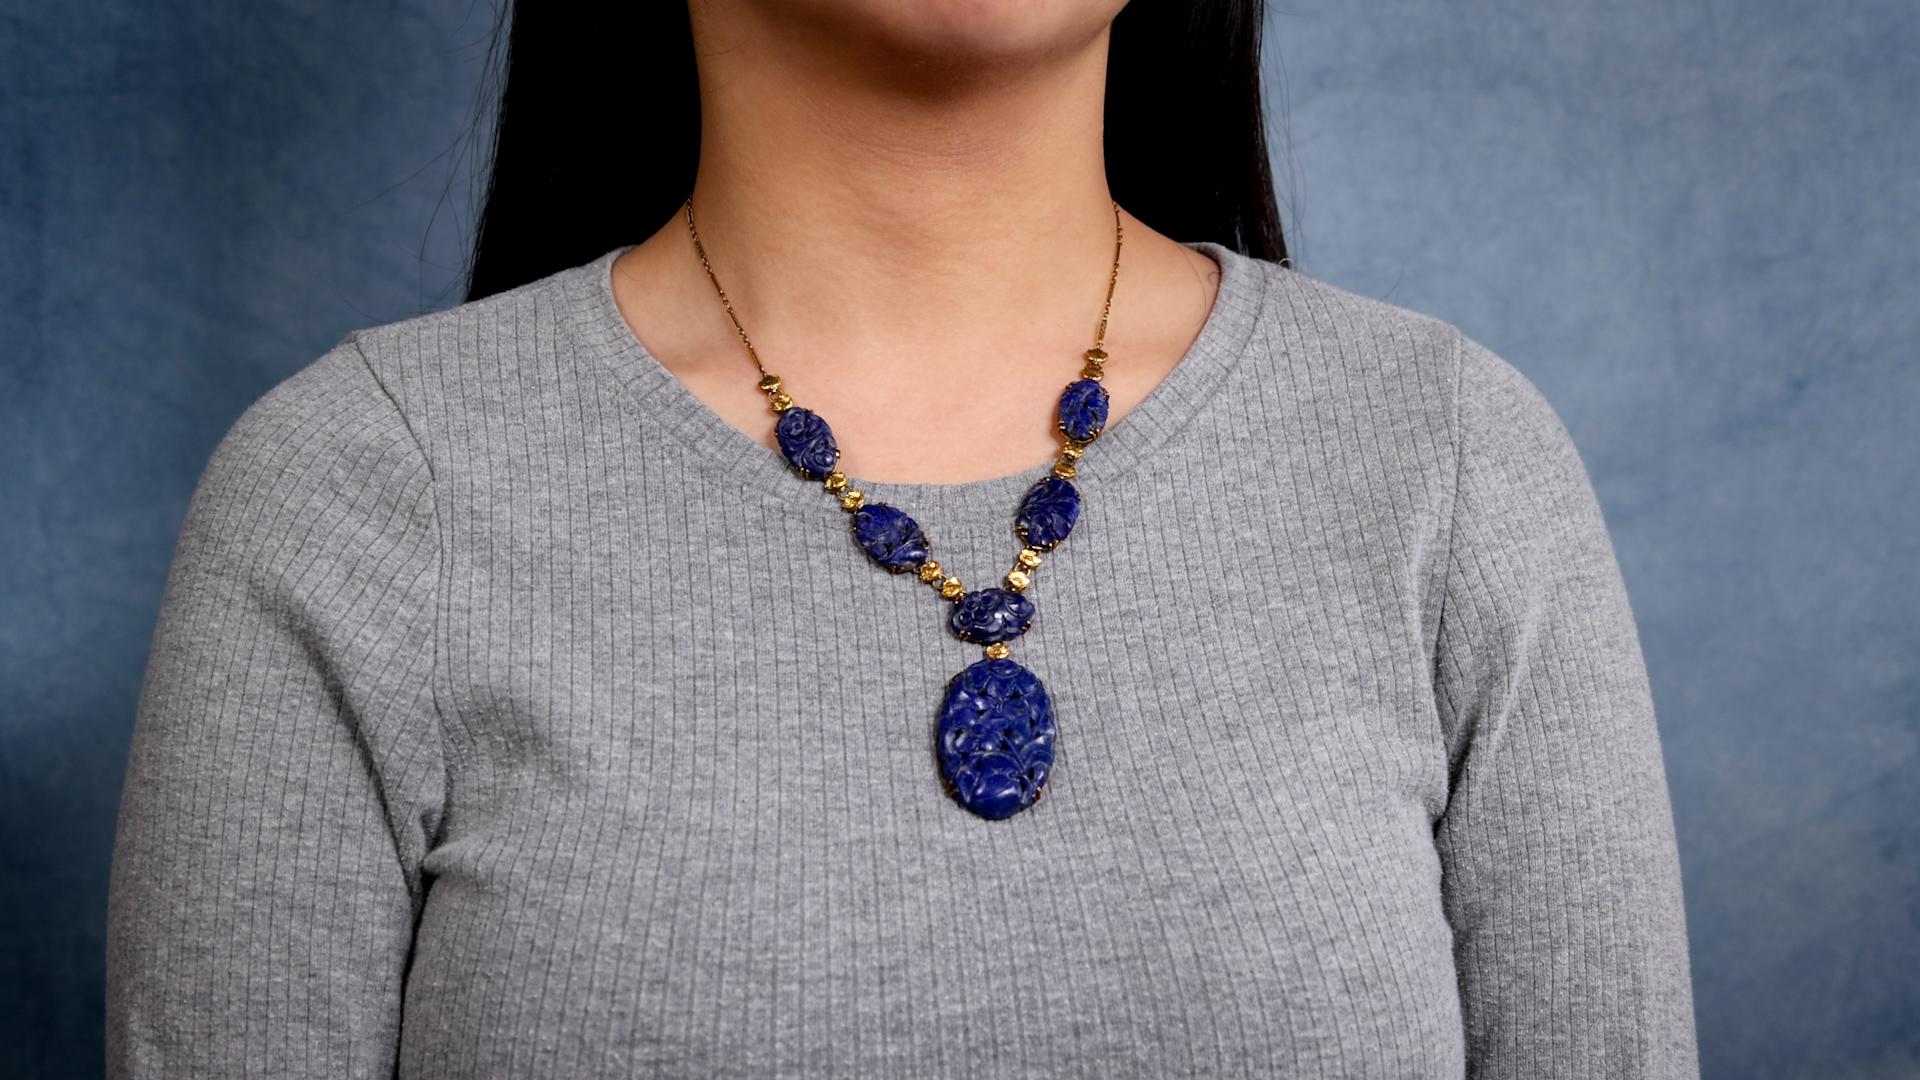 One Art Deco Carved Lapis Lazuli 14k Yellow Gold Necklace. Featuring six carved pieces of pyrite-speckled lapis lazuli. Crafted in 14 karat yellow gold with purity marks. Circa 1930. The necklace is 17 ½ inches in length.

About this Item: This Art